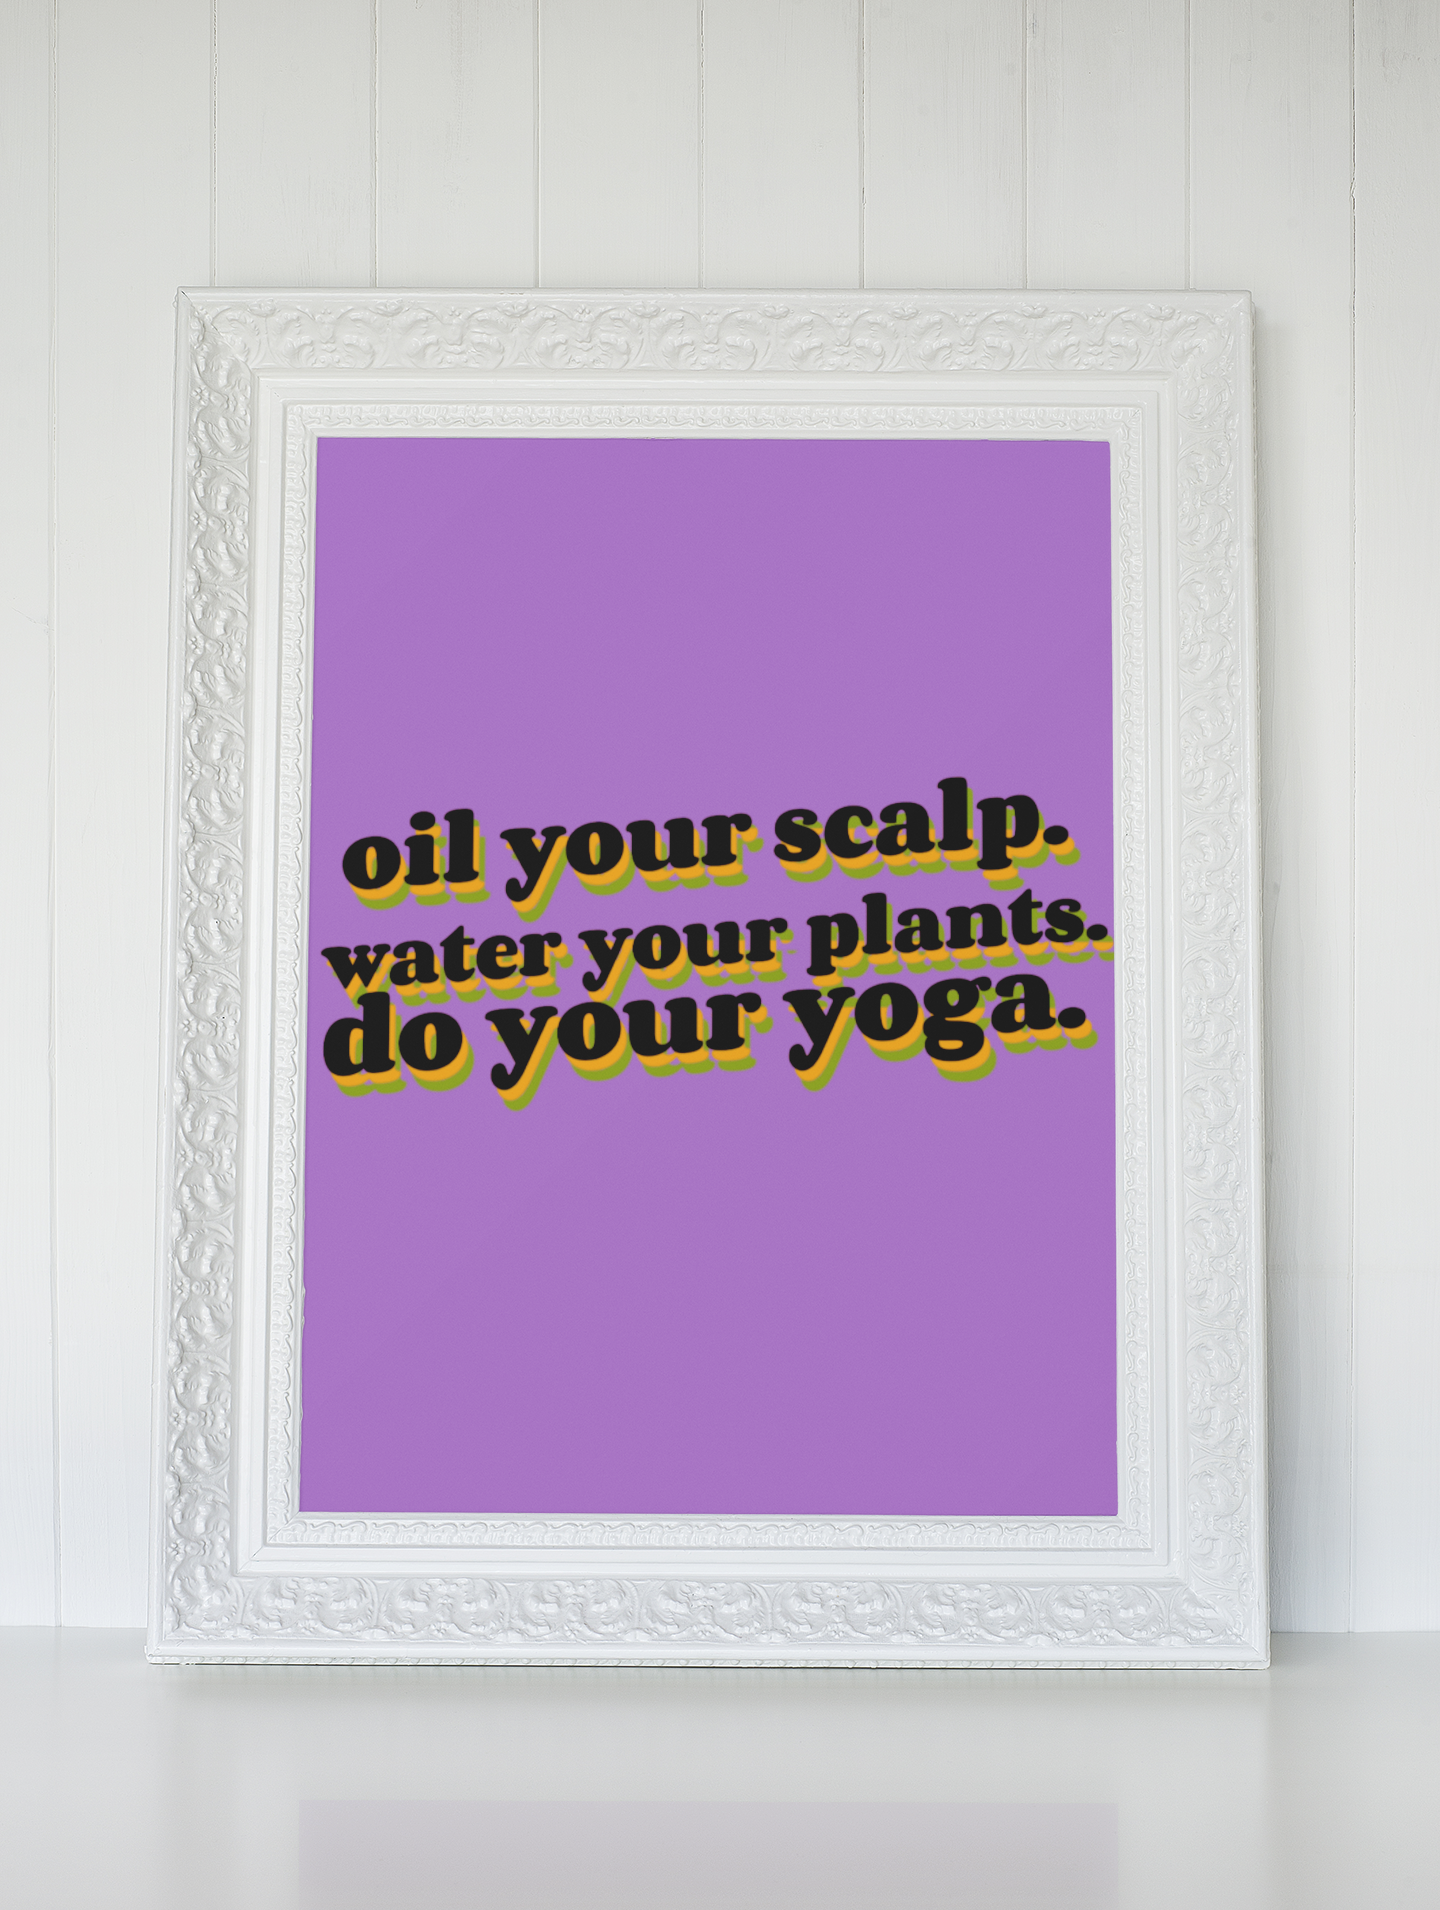 The Oil Your Scalp posters